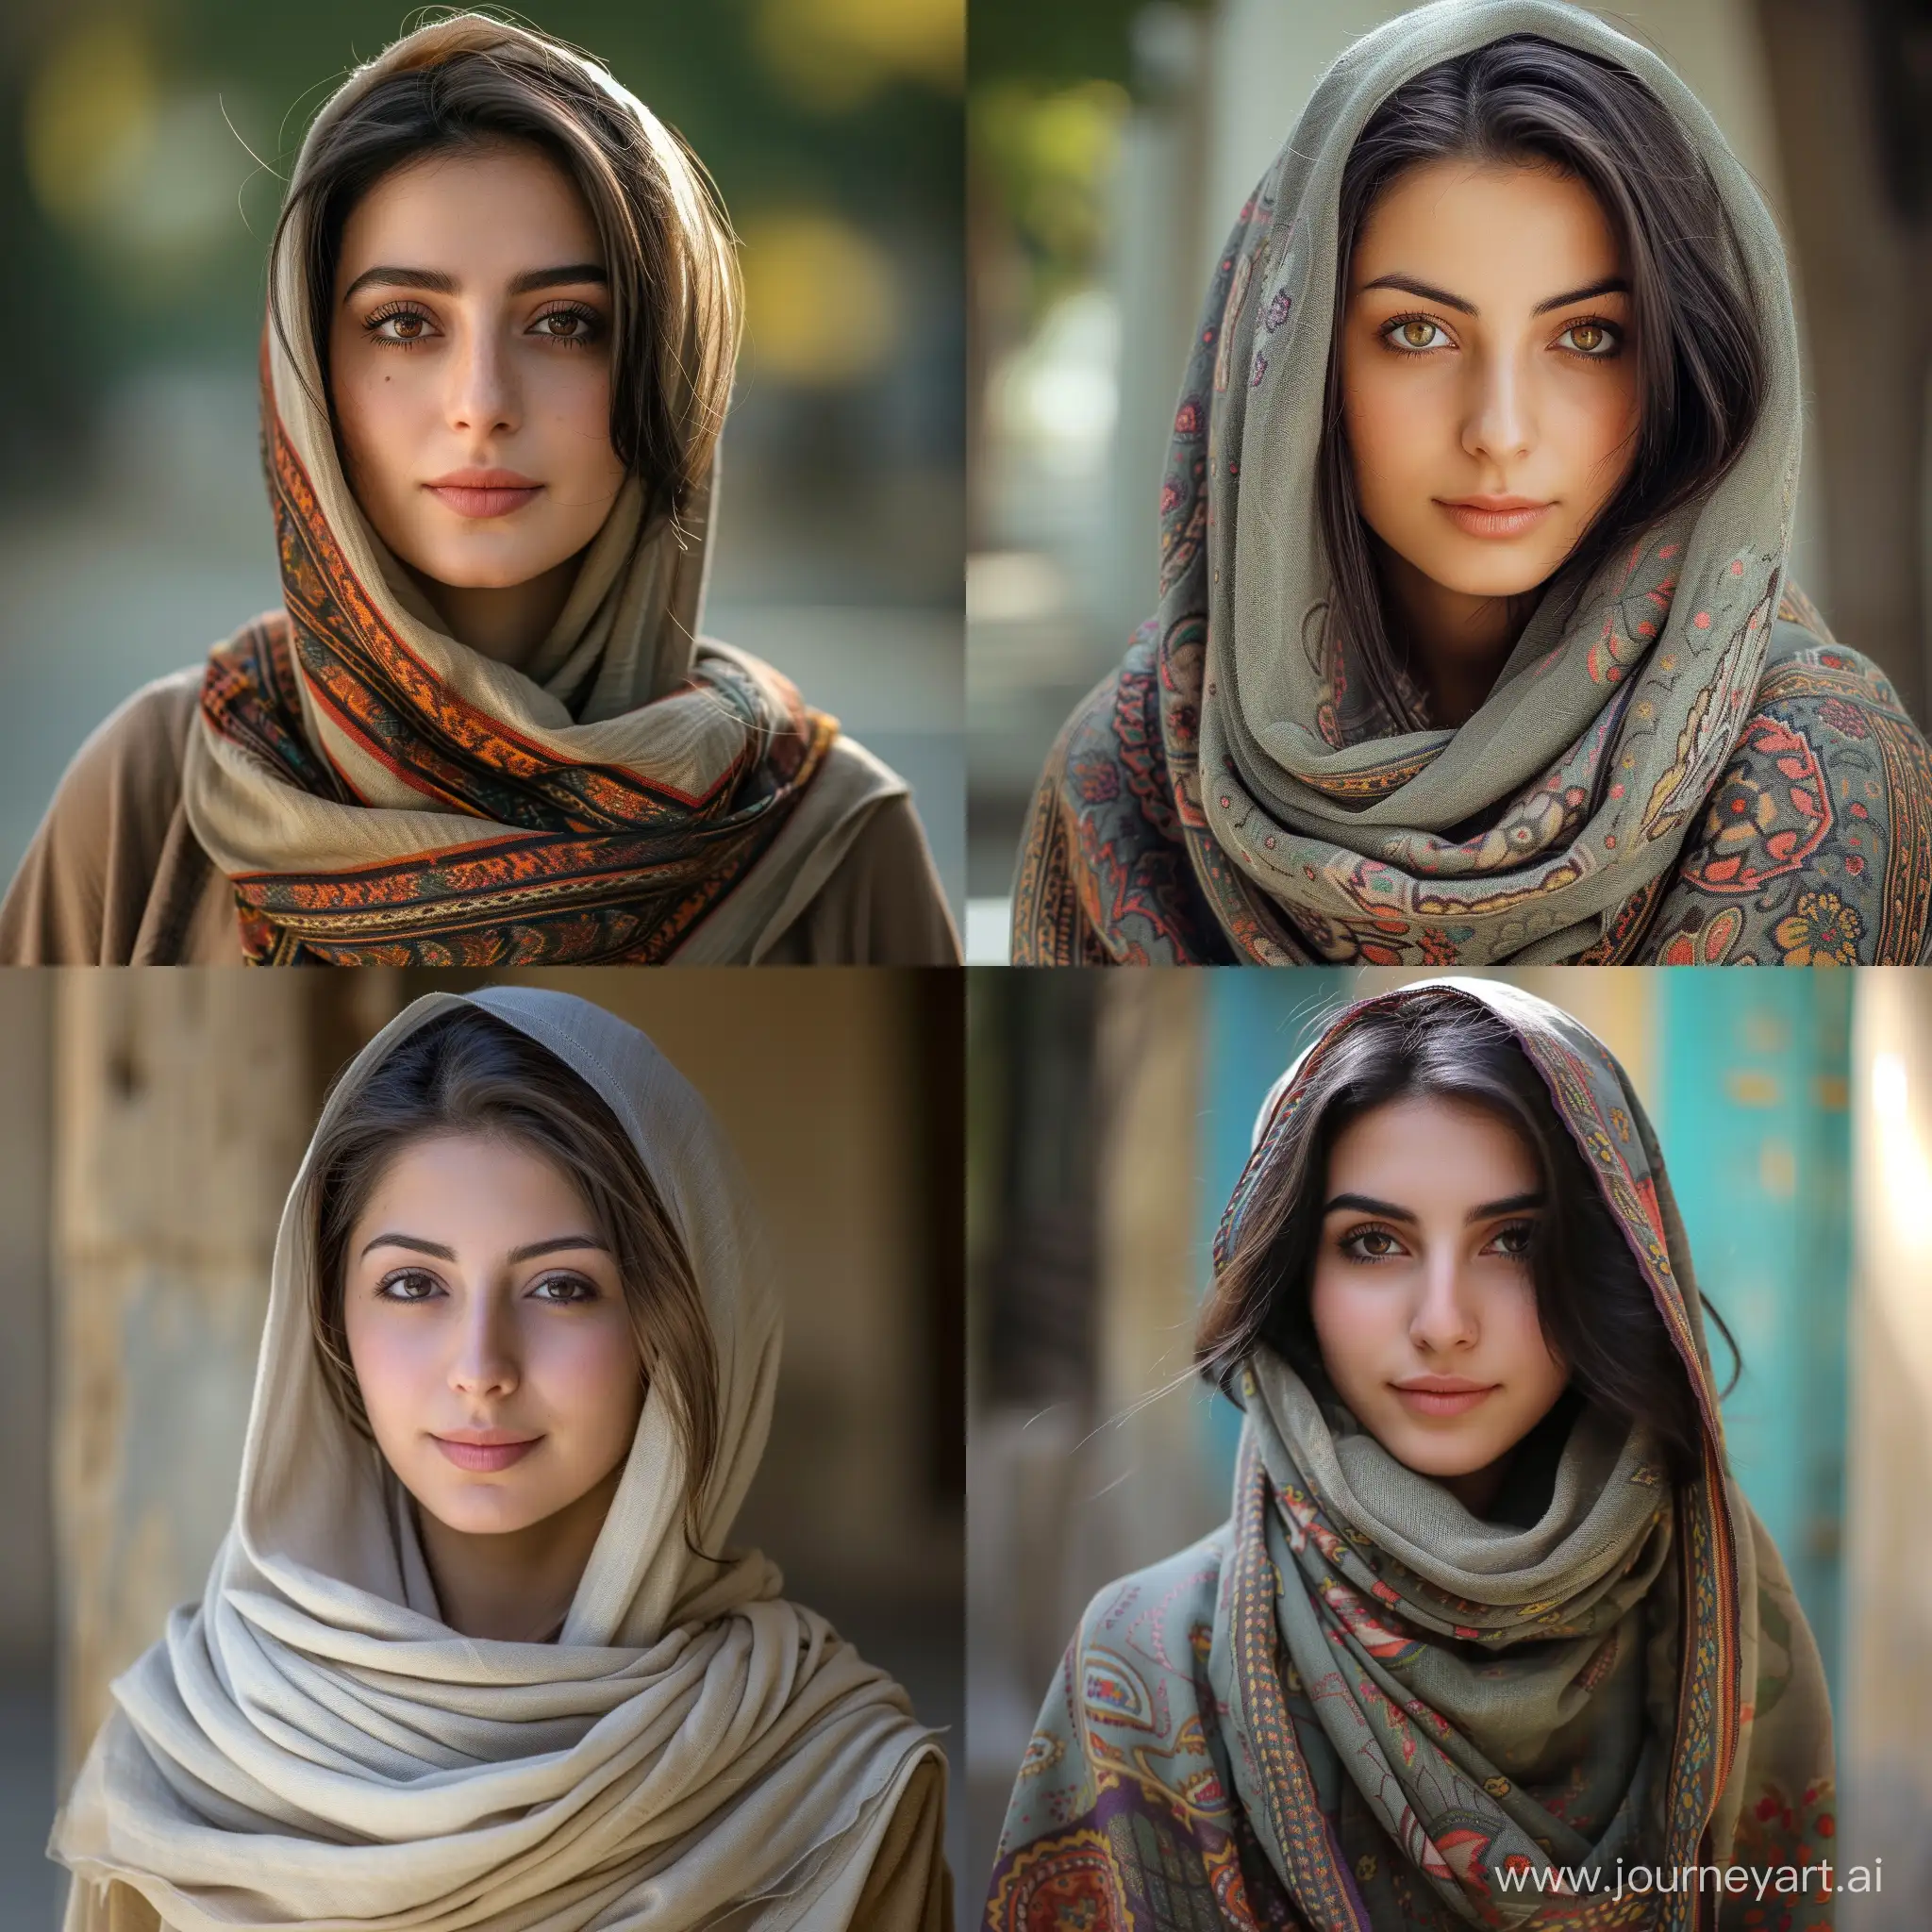 Young and attractive Iranian girl with hair outside the scarf in Kha